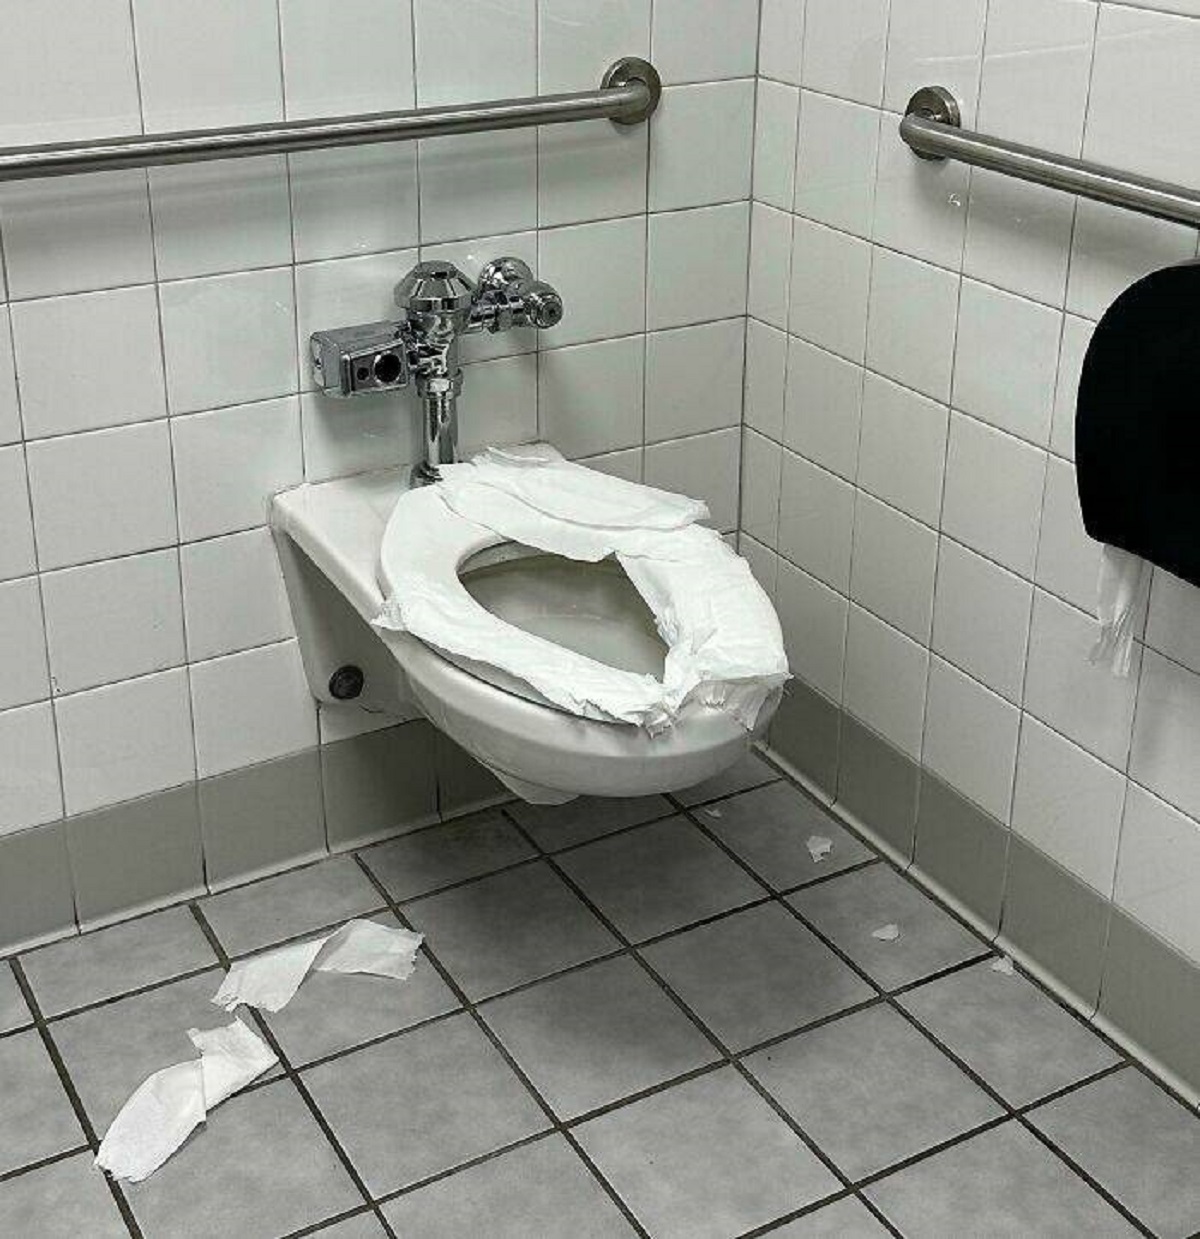 "A Guy At My Workplace Uses This Bathroom Every Day, And Each Day He Leaves His "Nest" Behind. It's Disgusting And Disrespectful To The Cleaning Staff"